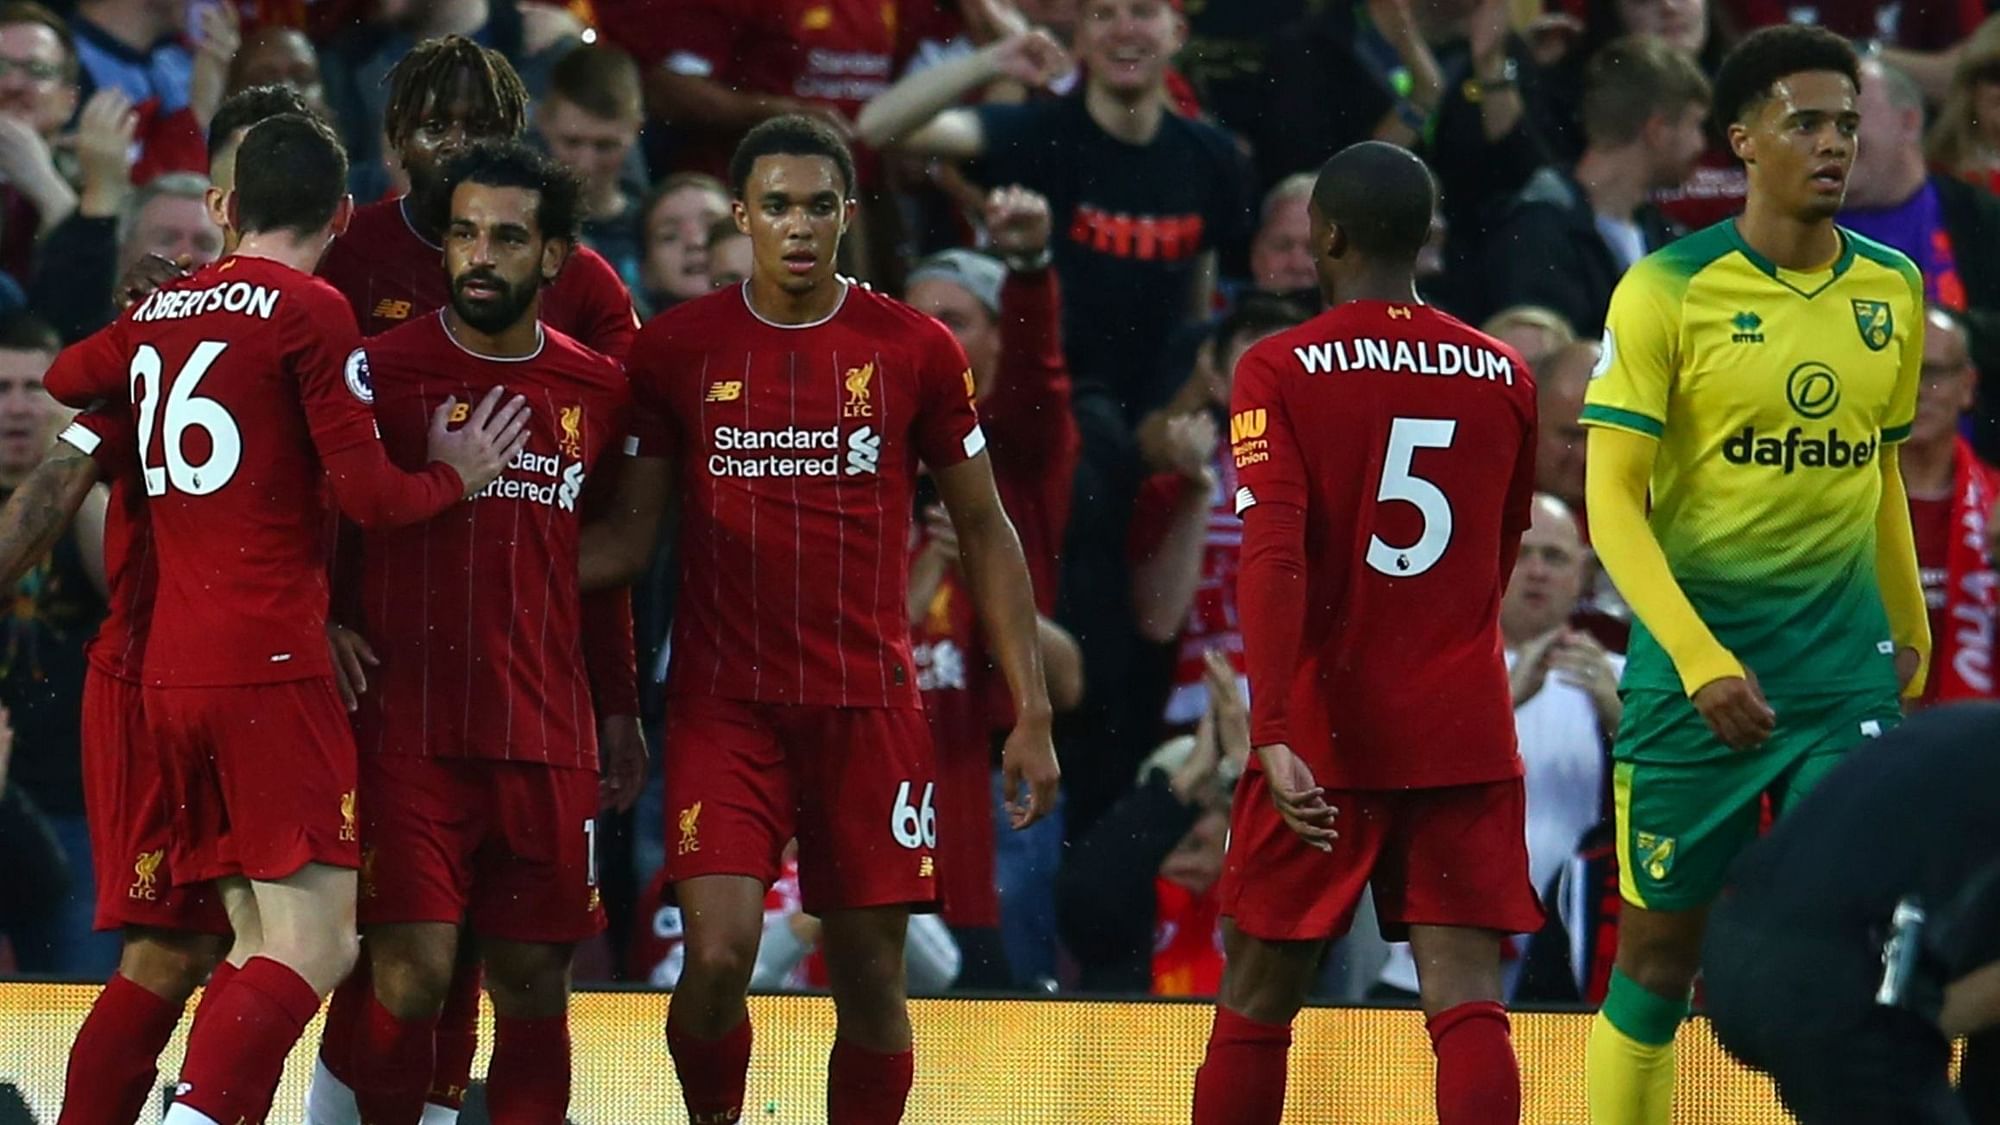 Liverpool opened its bid to end a 30-year English title drought by beating Premier League newcomer Norwich 4-1.